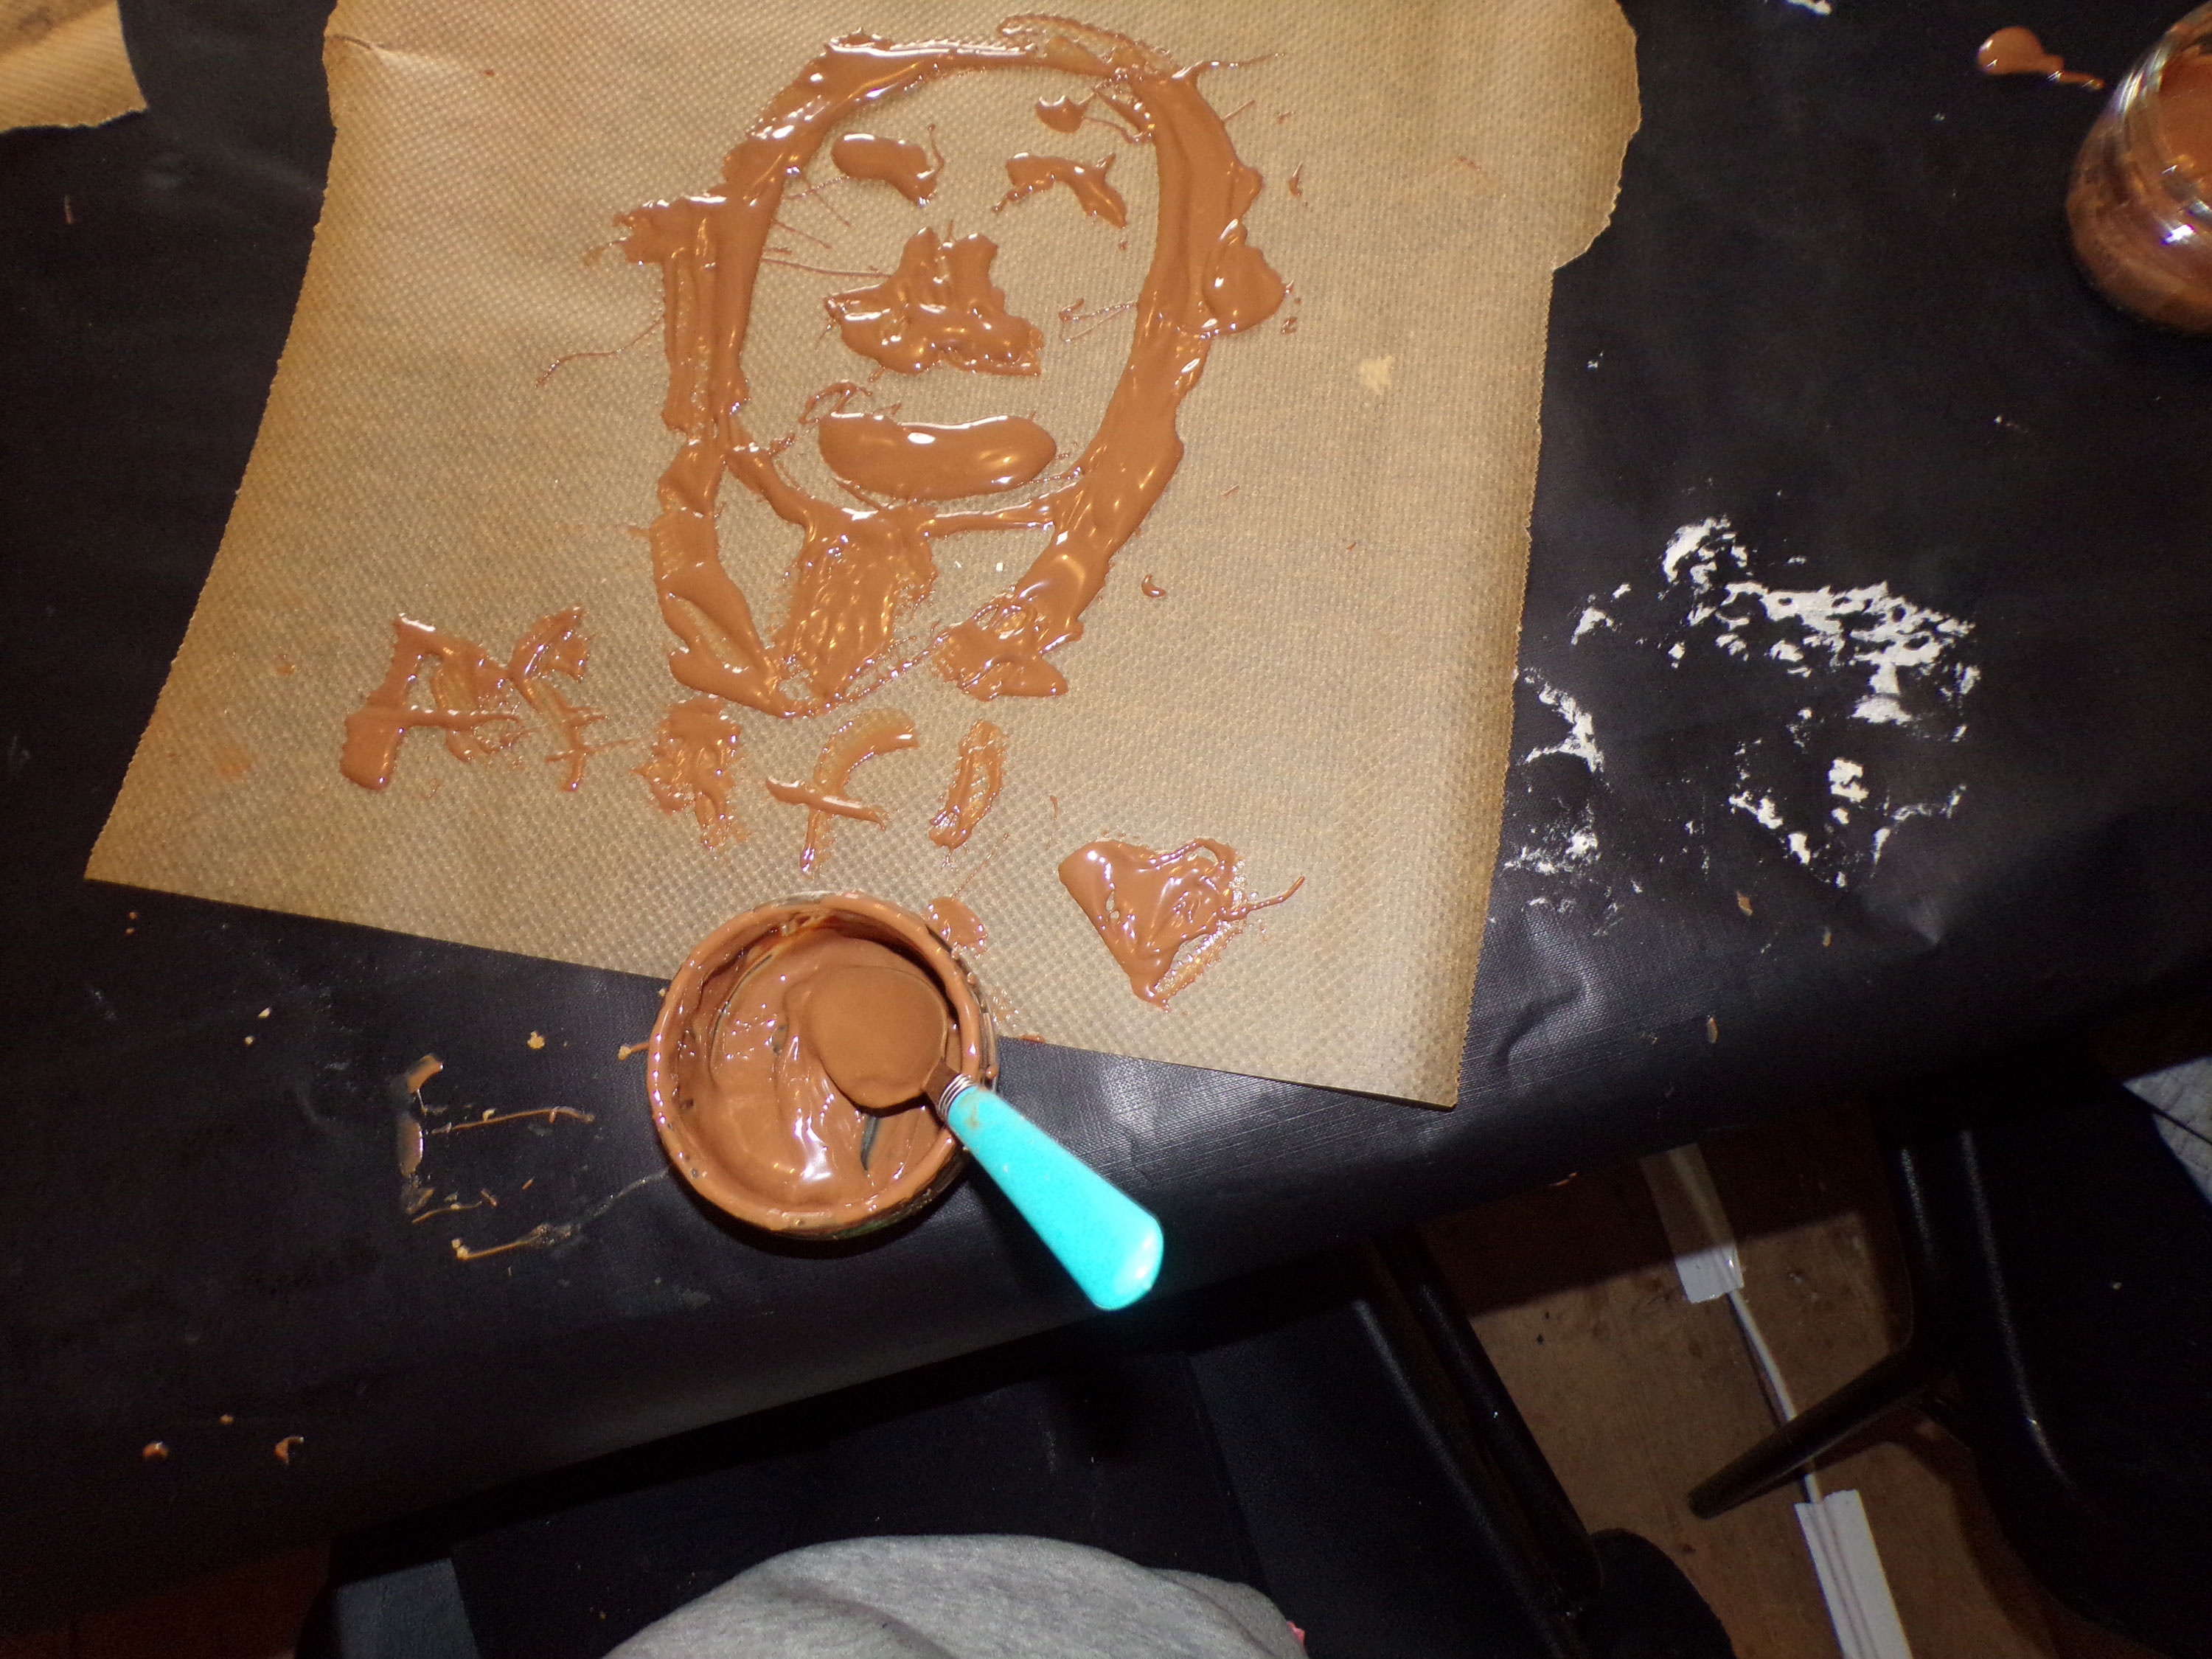 A drawing made with melted chocolate